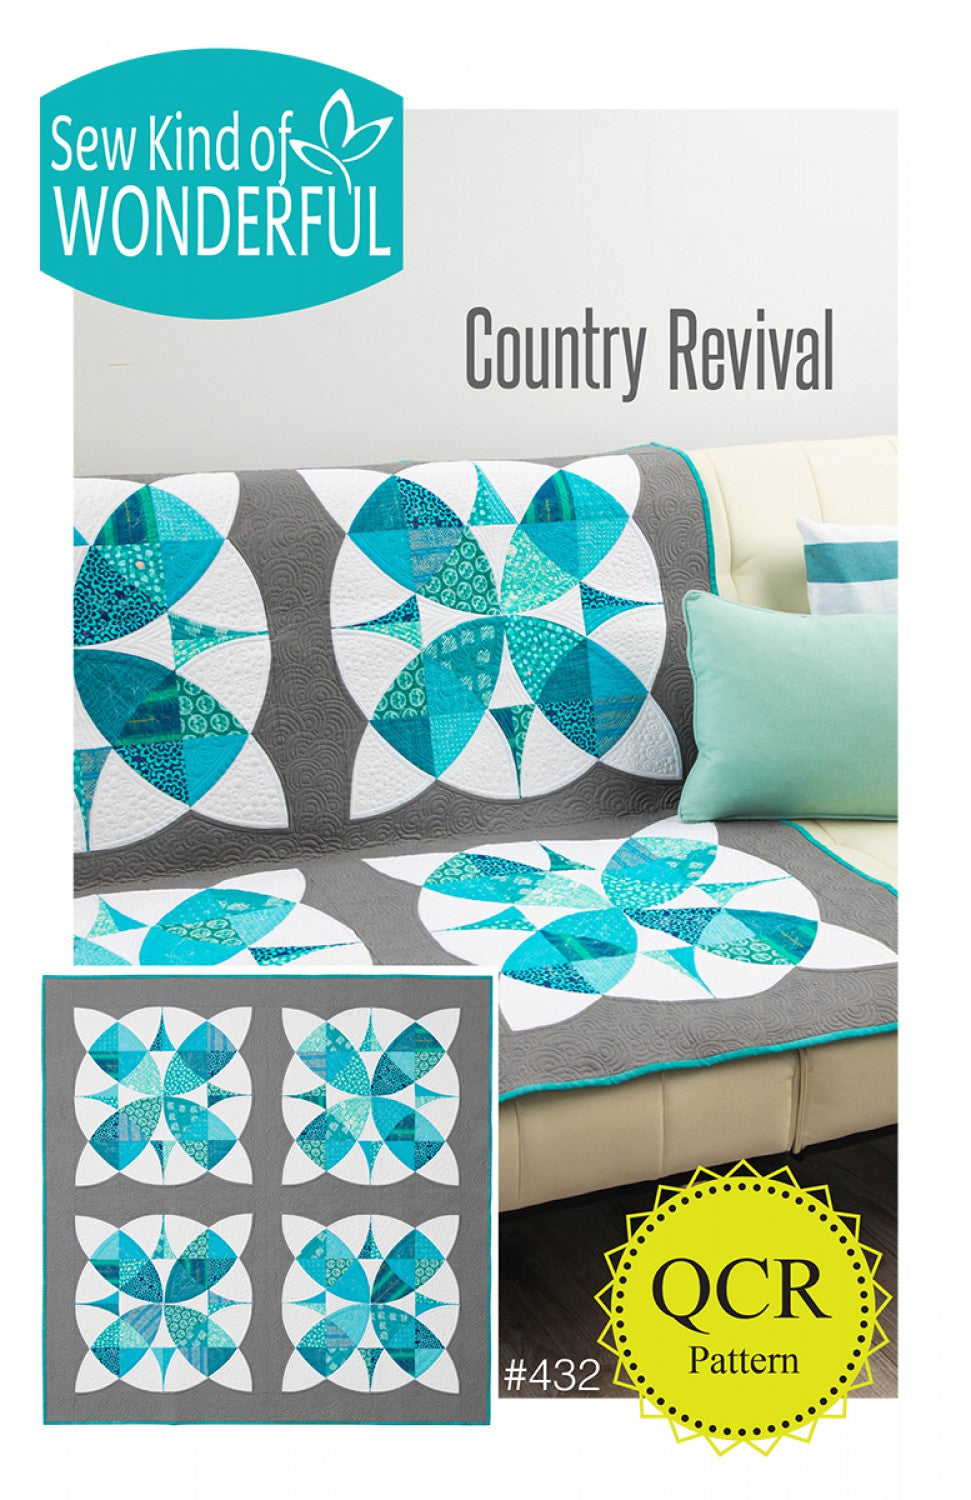 Country Revival - Quilt Pattern - Sew Kind of Wonderful